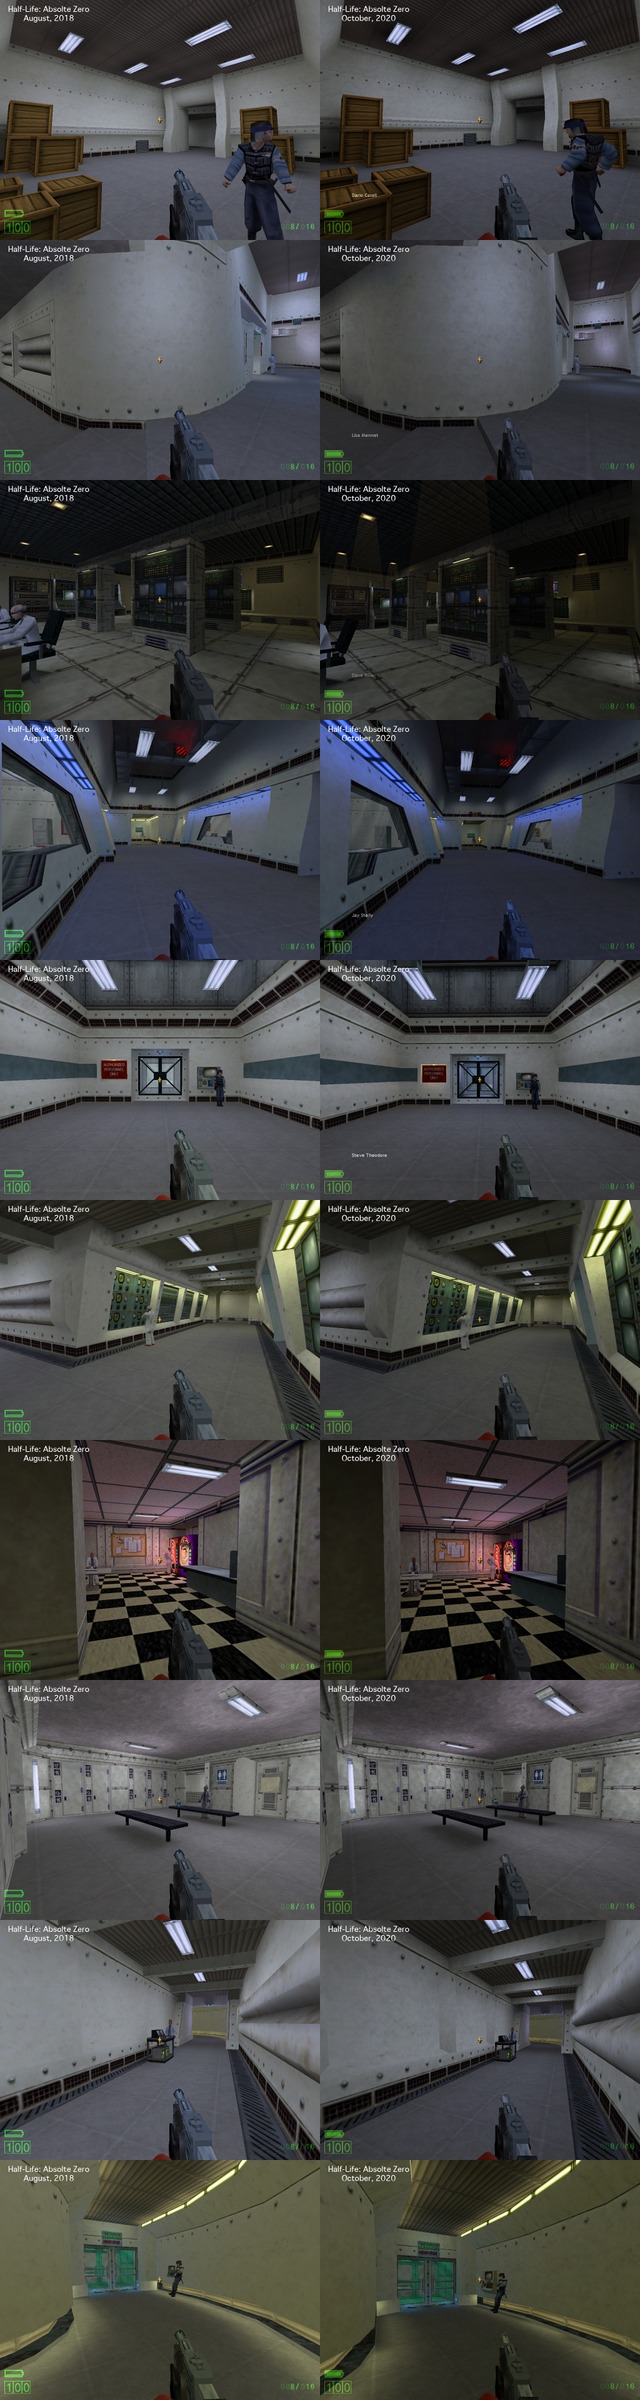 The evolution of Half-Life: Absolute Zero (namely the first map in the mod.)

These images are quite long, so you will need to click onto them to see the full thing. Advised to open them into a new tab to see them at their original resolution.

2014 - Development starts picking up steam again, level design being headed by GaussGunner and myself. ZedMarine would be slowly be making a return during this era.
2015 - Zed would become level design lead again, GaussGunner would start taking a back seat and would eventually leave to pursue new artistic endeavors. We would finally drop the name "Half-Life E3 1998" later in August and become "Half-Life: Absolute Zero." Demo was planned to be released early 2016 and a full release to follow only a few months afterwards. Blue24 would join the team early that year, marking the retirement of the 2010-2012 code.
2016 - Reality sinks in, we knew Half-Life: Absolute Zero was not in the state to ship early that year as a demo. Various maps that were functioning months prior were no longer playable and discussion on whatever or not development should be restarted again began. We would be able to salvage the maps, but disaster struct once more. The April build that sparked the discussion of rebooting development ended up leaking to the public and everyone could see the state of HLAZ as of April of 2016.
2017 - Things start to start looking up for the mod! Pre-demo testing went good and it was being well received among play testers. A few odd decisions would take place in the month prior to the demo shipping, but overall the Demo was overall well received. 
2018 - Things were looking up for the project, everything seemed to be going as planned... Until, well, you know the rest of the story.